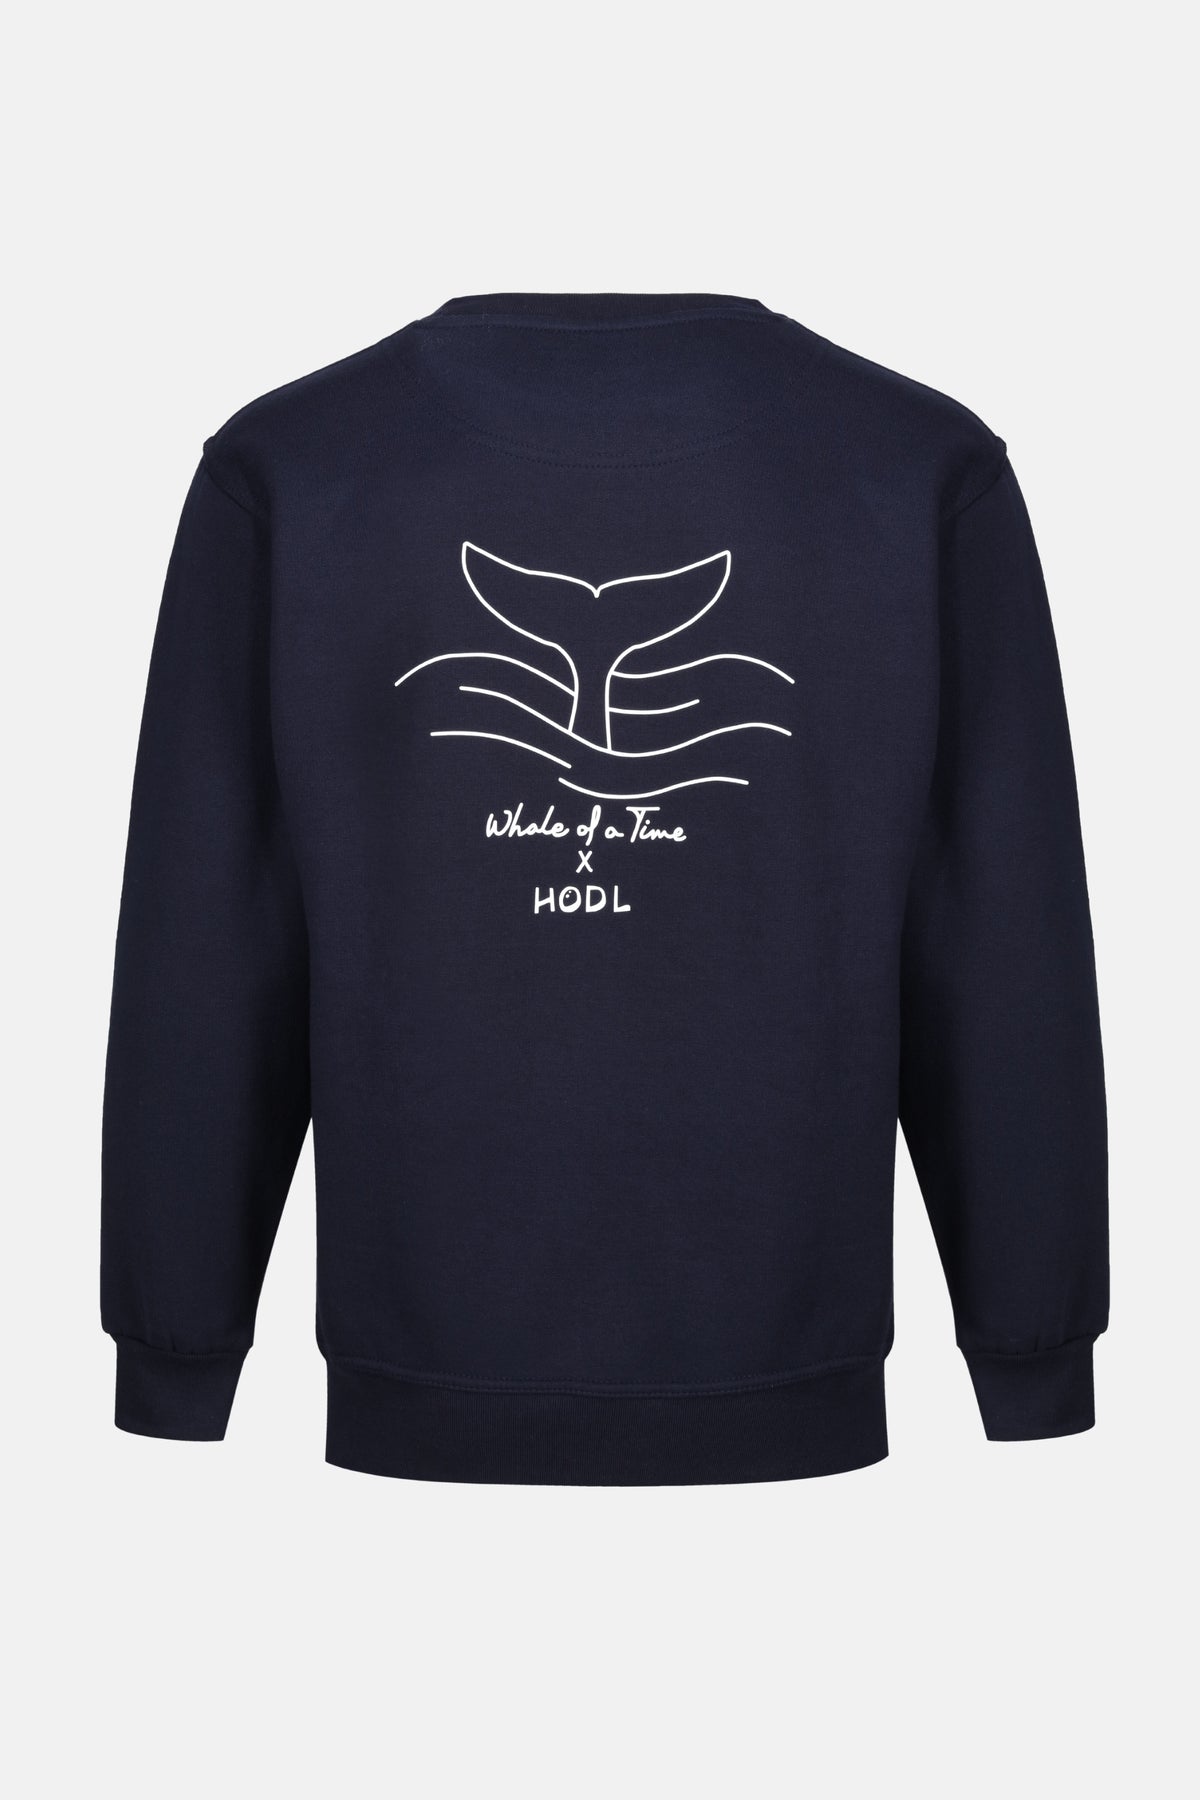 Whale Of A Time X HODL Unisex Sweatshirt - Whale Of A Time Clothing